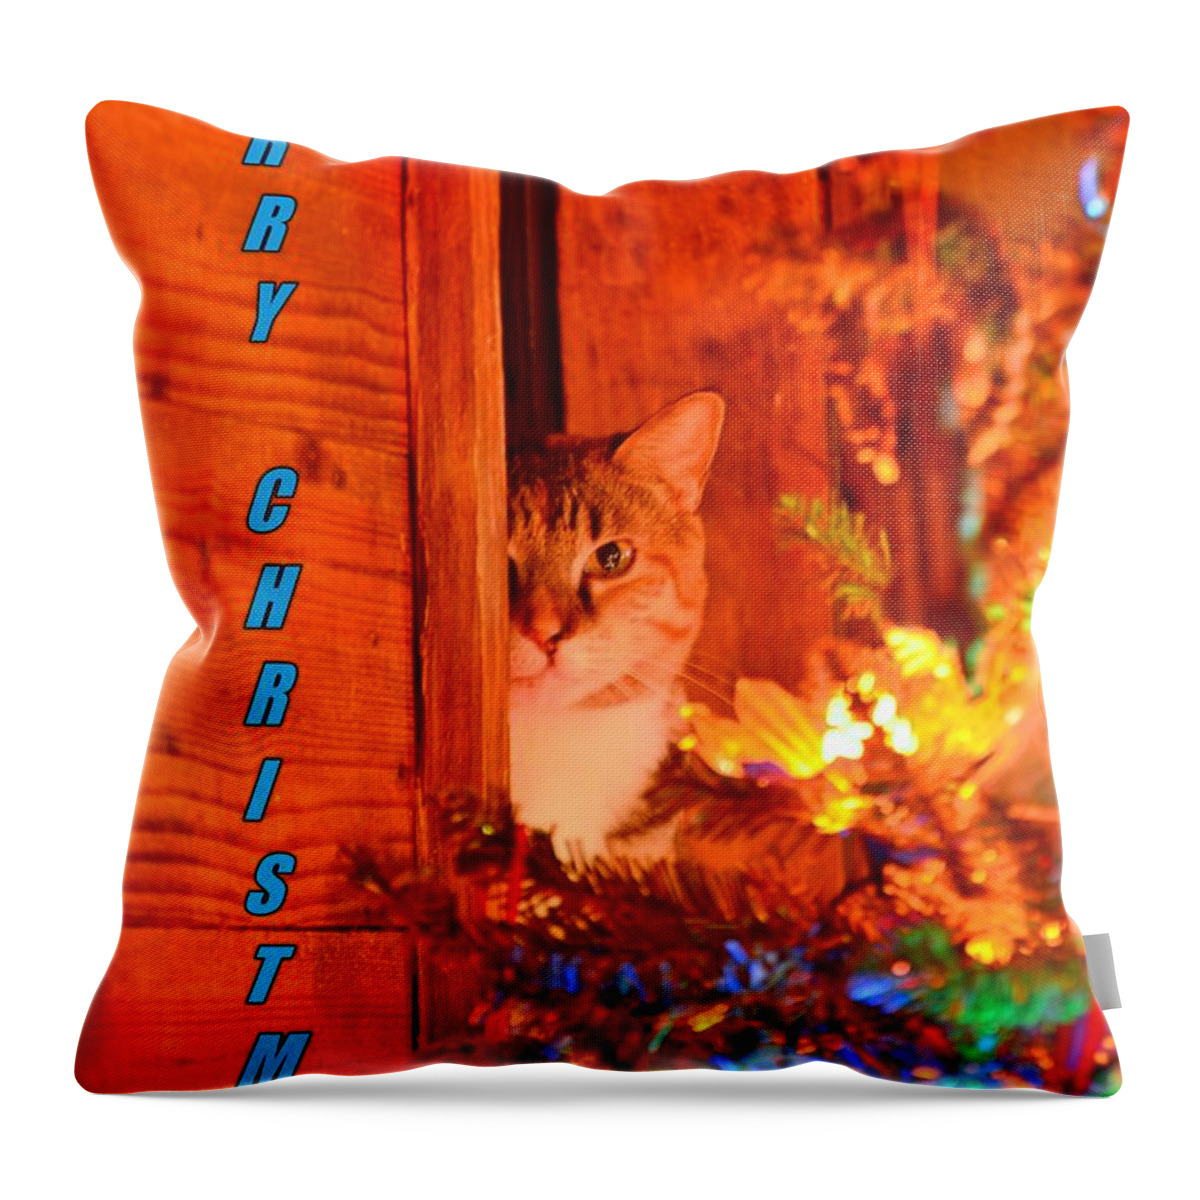 Merry Christmas Waiting For Santa Throw Pillow featuring the photograph Merry Christmas Waiting For Santa by Lisa Wooten